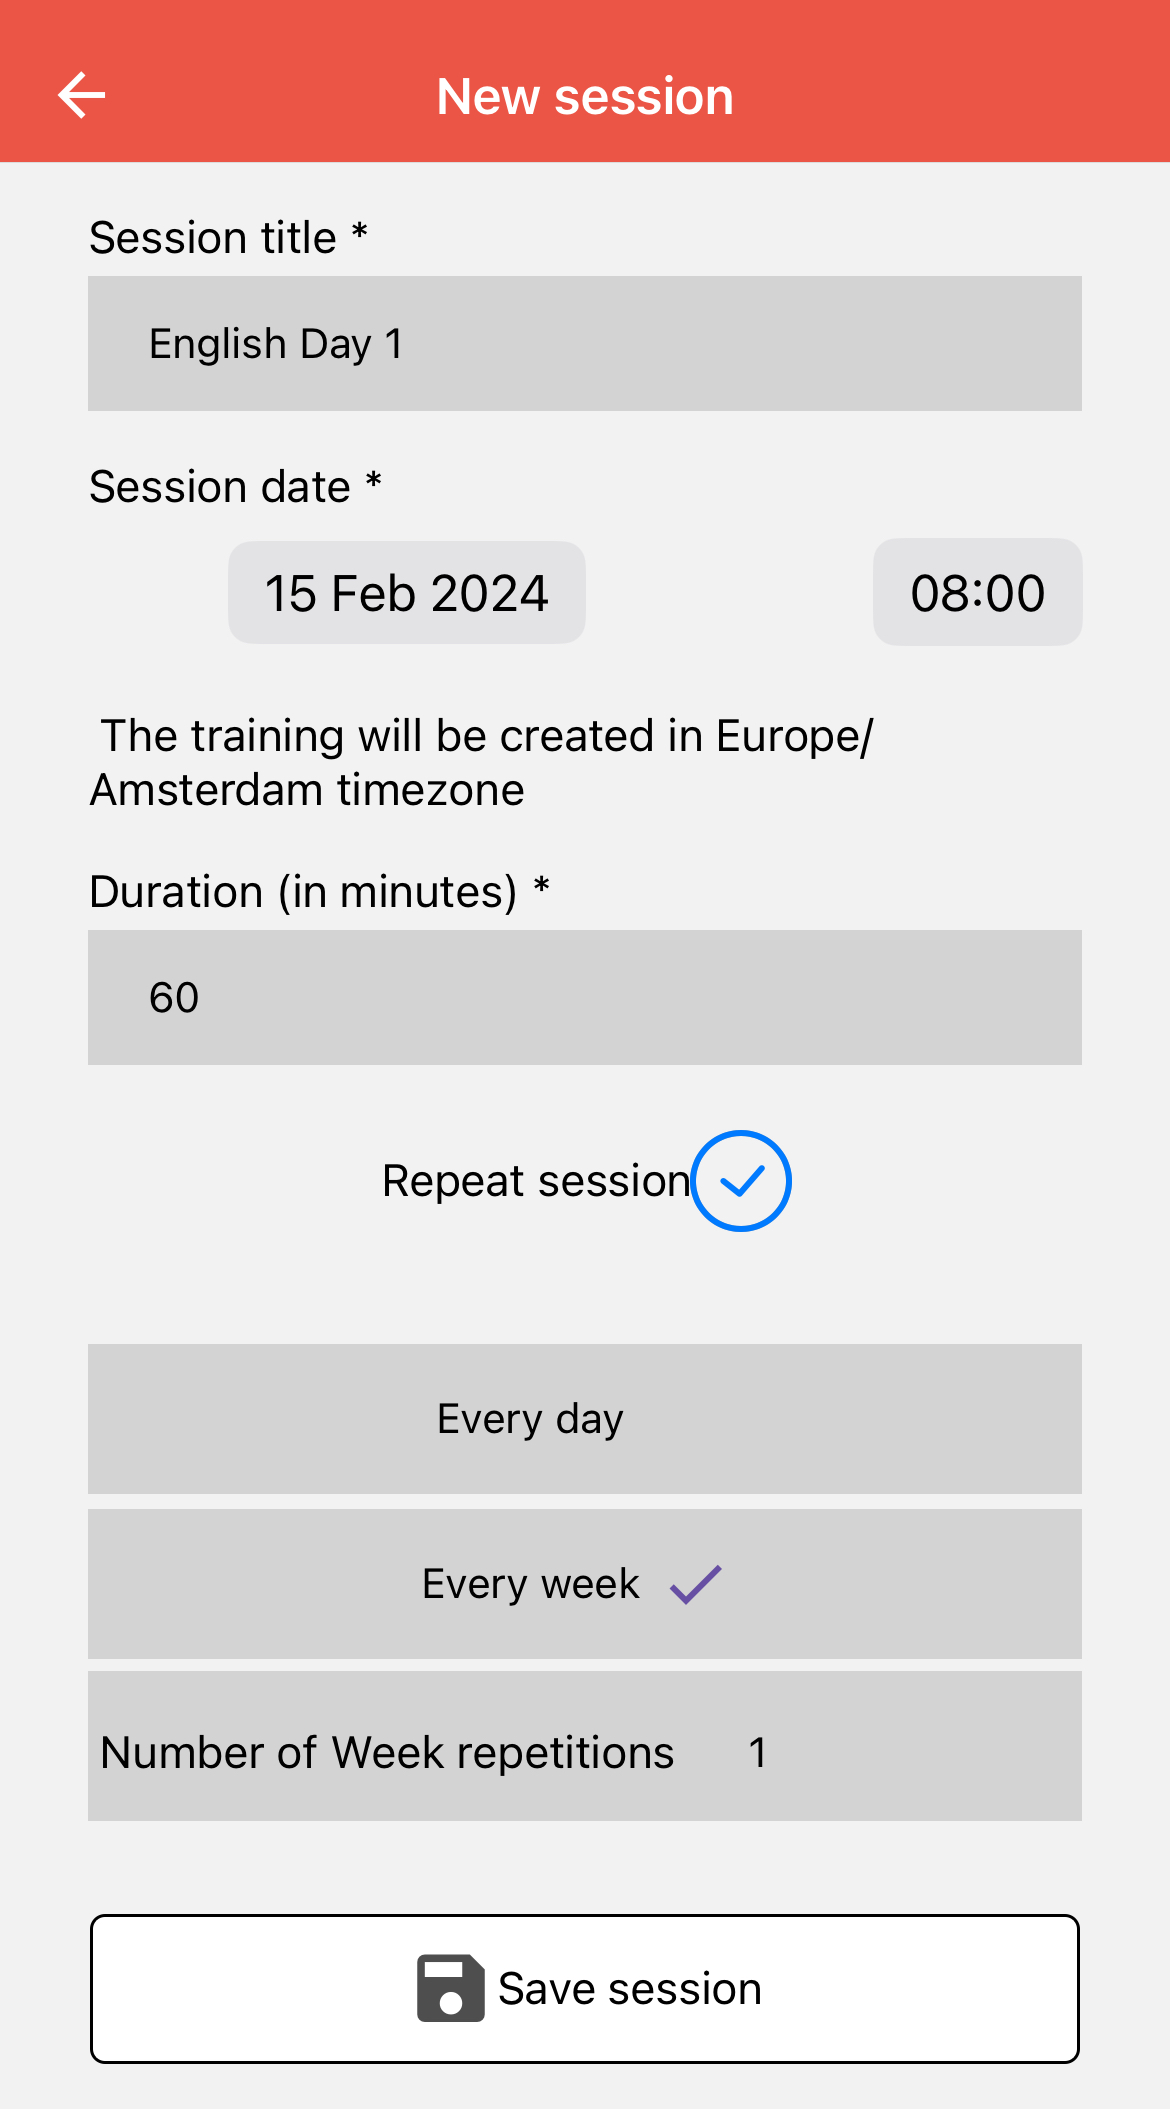 Sessions or trainings can be created for a course. In doing so you indicate the date, time and duration of the session. A premium feature of the app also allows you to create multiple recurring sessions all at once.